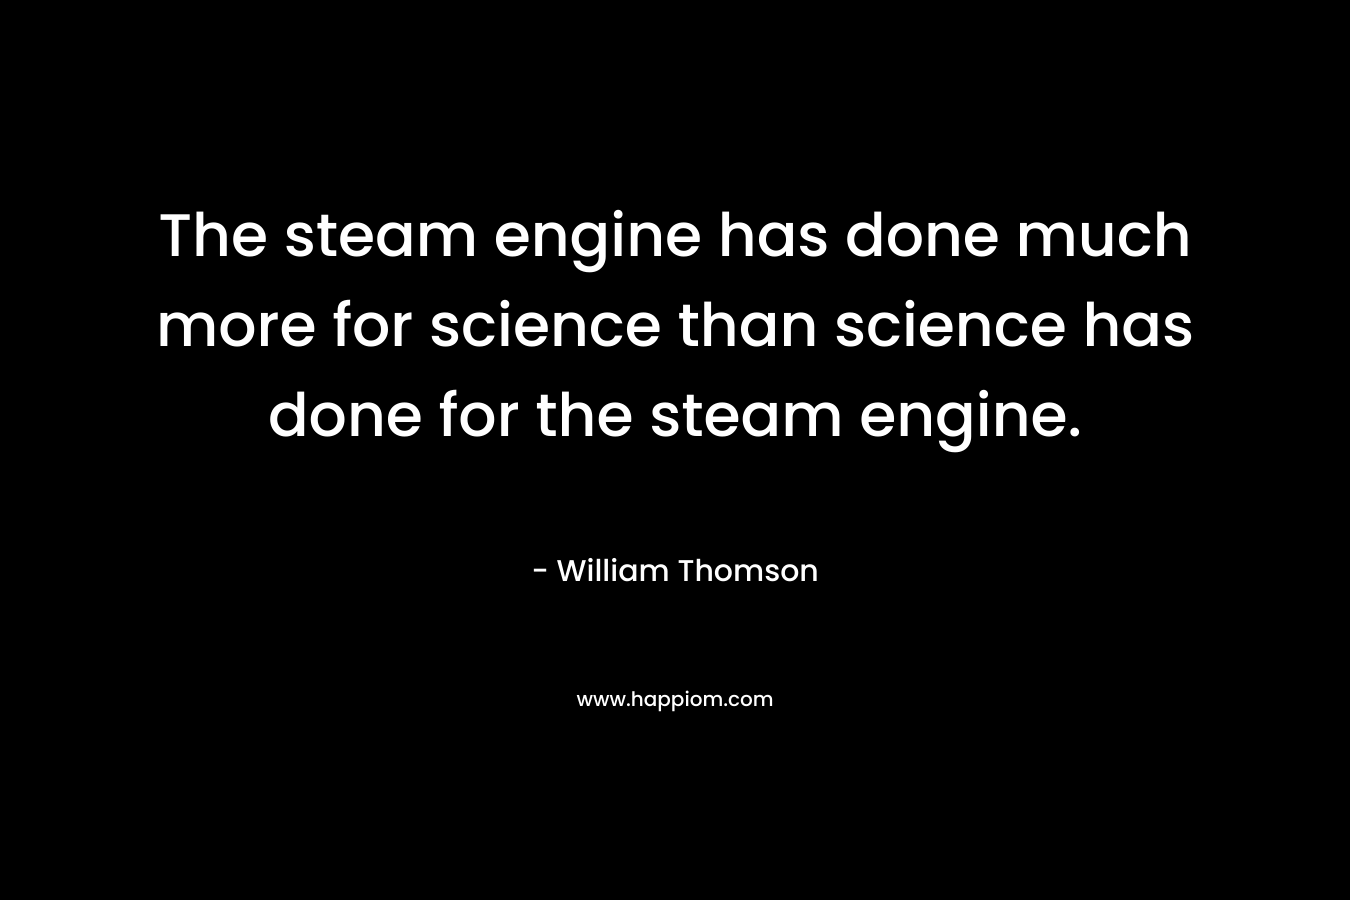 The steam engine has done much more for science than science has done for the steam engine.